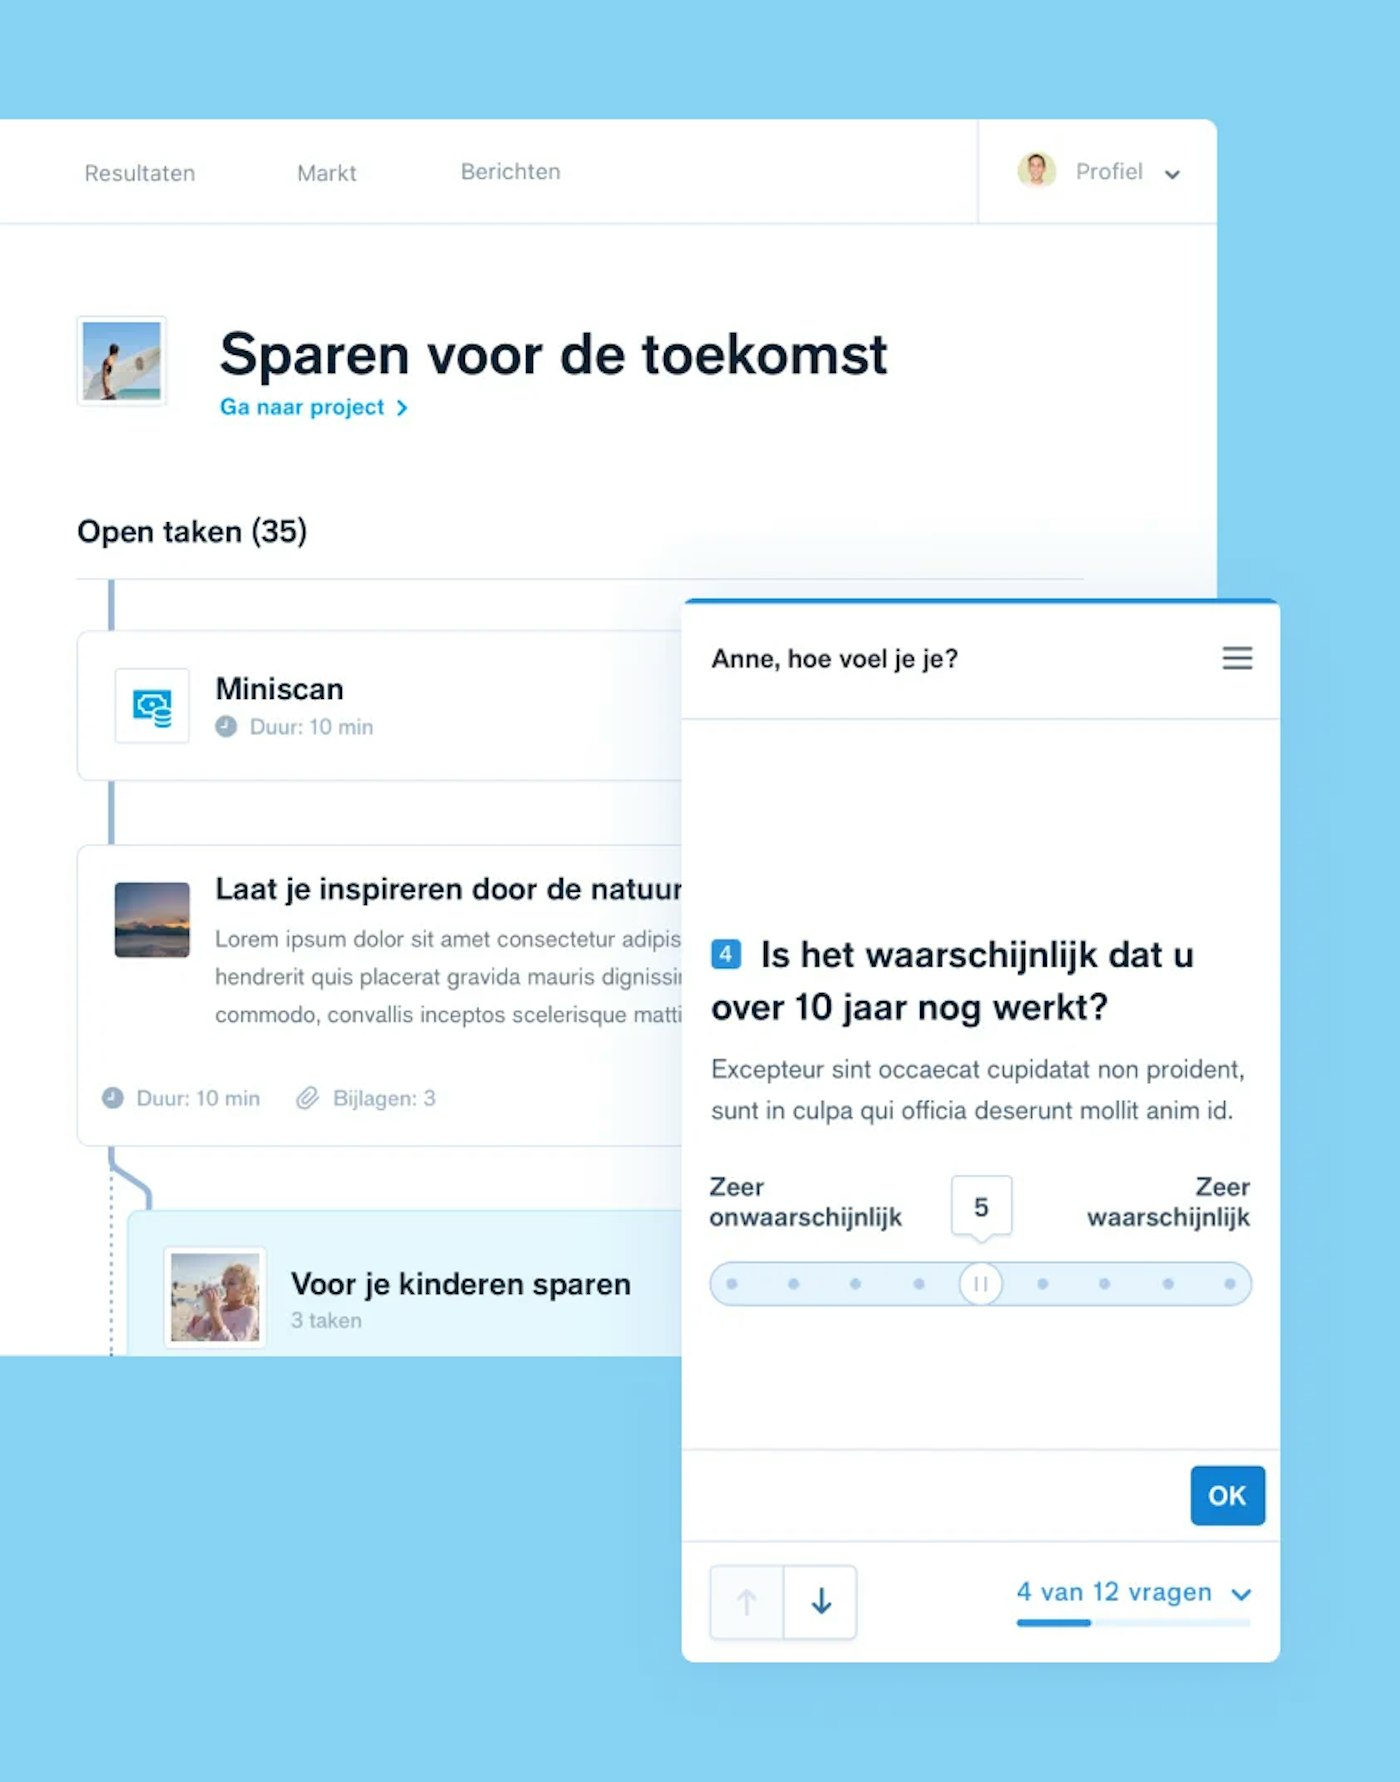 Johan project tile showing a part of the Johan web application interface on a light blue background